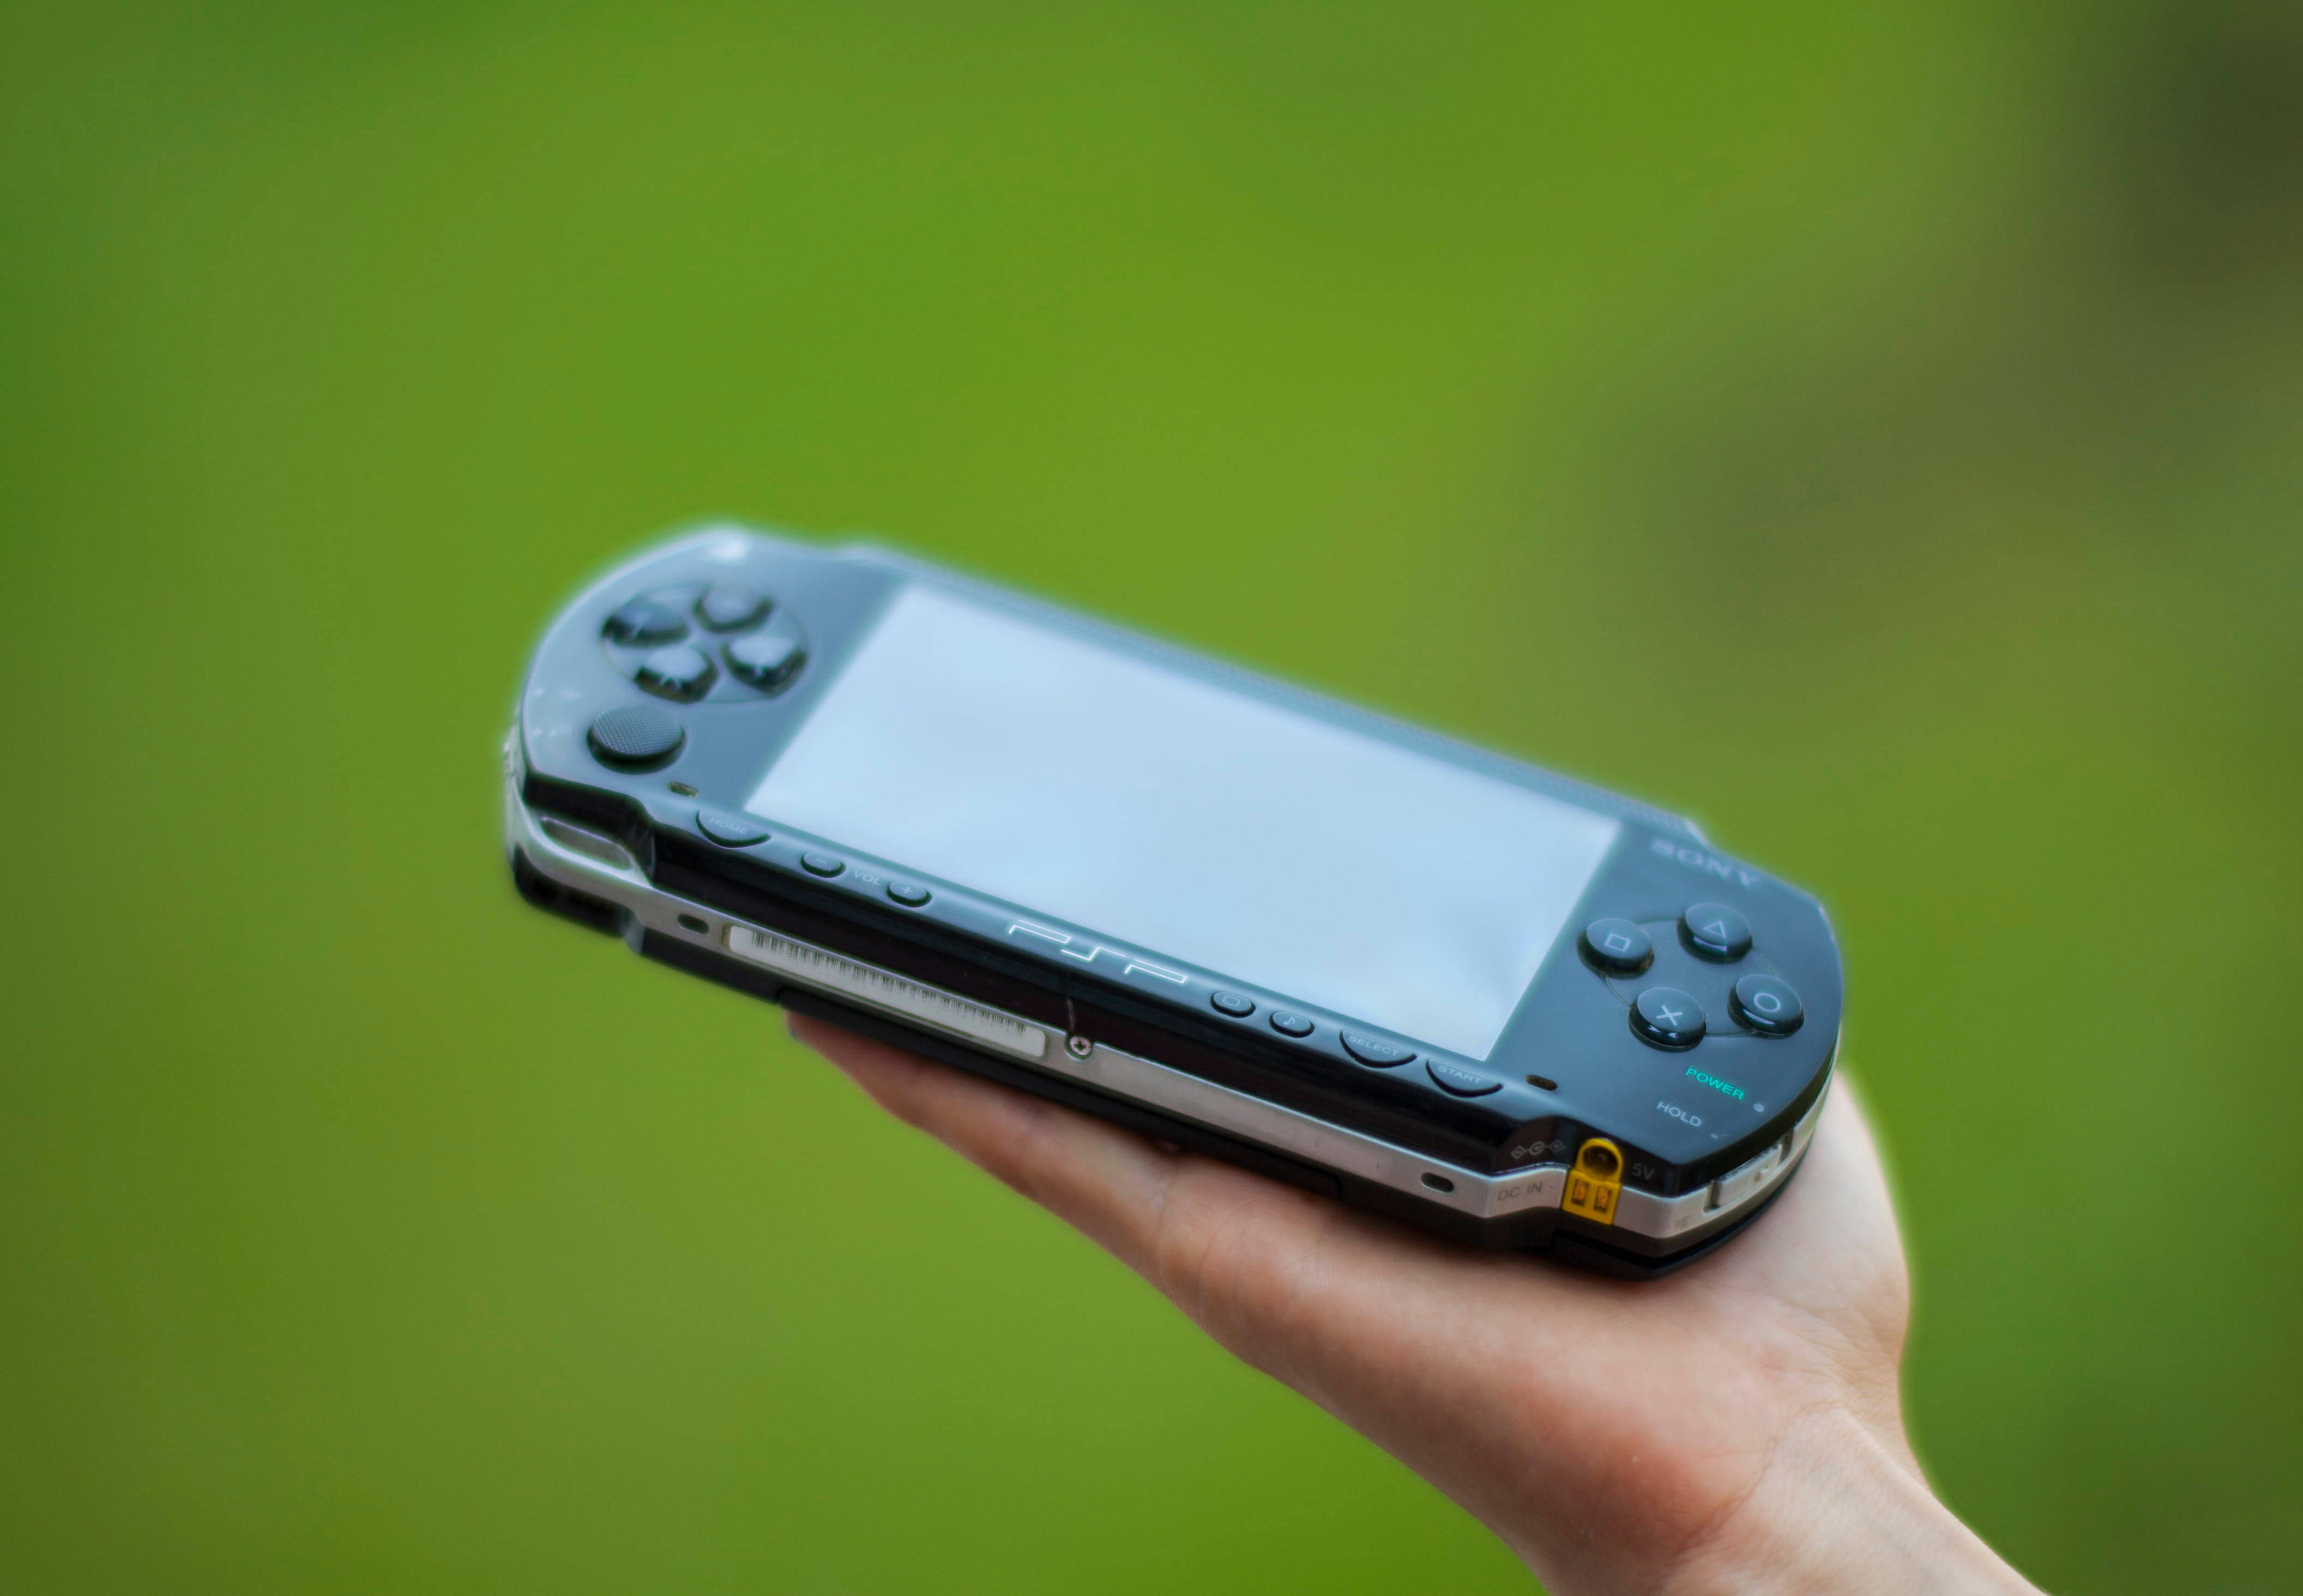 Psp On Someone's Hand Wallpaper